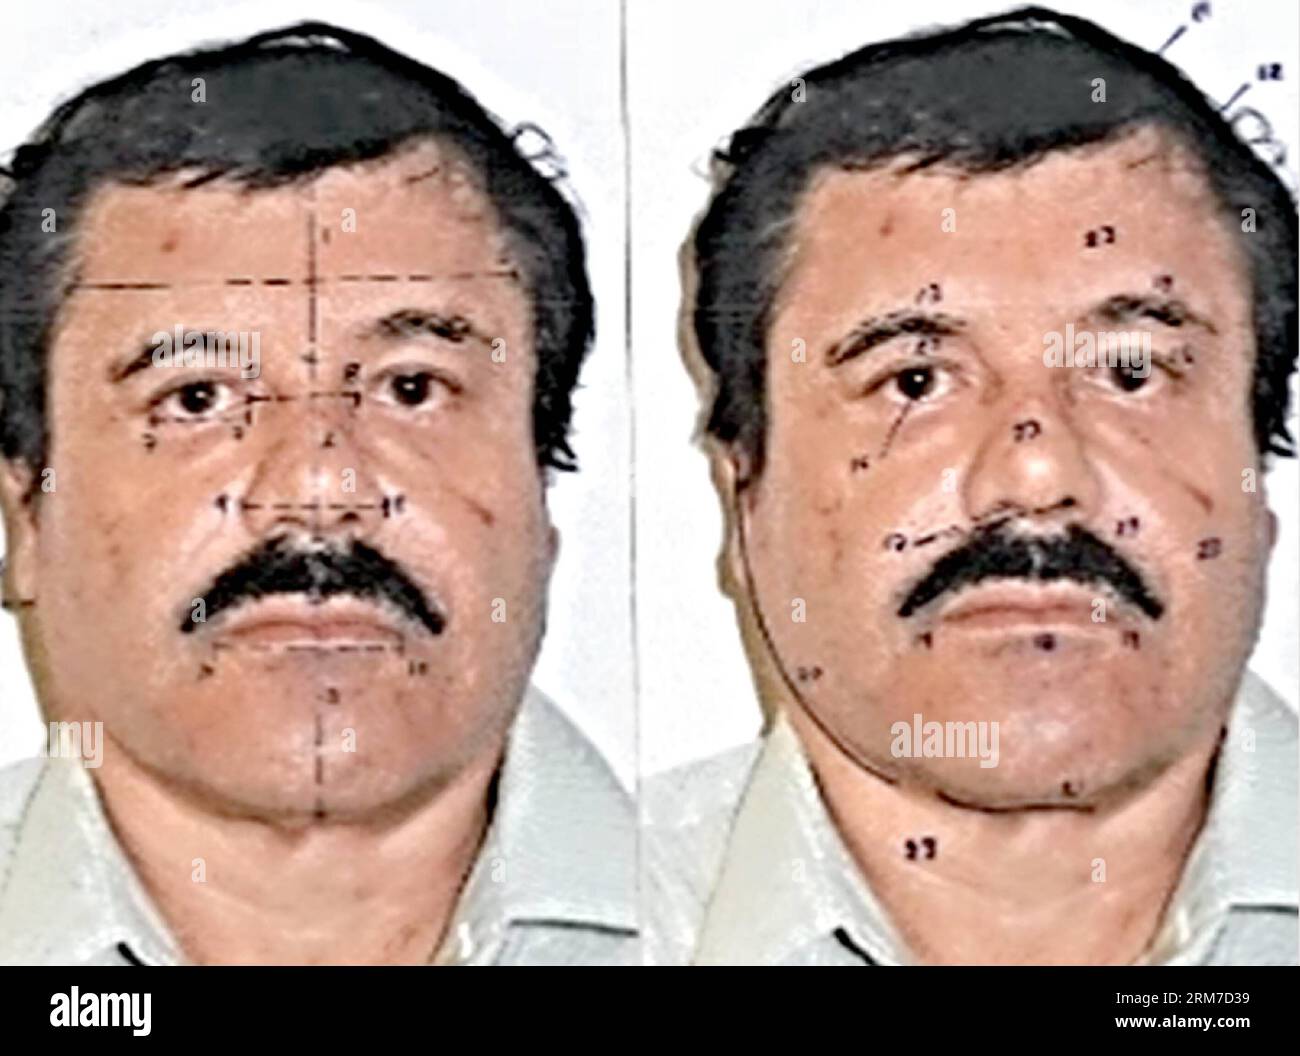 Image provided by Mexico s Attorney General Office (PGR), on Feb. 25, 2014, show Joaquin El Chapo Guzman, during the scientific tests to prove his identity, in Mexico City, capital of Mexico. The Sinaloa Cartel leader was subjected to a buccal swab, a phisiognomic identity study and a test of 10 fingerprints. Federal courts in Mexico Tuesday formally charged Joaquin El Chapo Guzman, the captured leader of the Sinaloa drug cartel, with organized crime and drug trafficking. (Xinhua/Mexico s Attorney General Office) MEXICO-MEXICO CITY-DRUGS-GUZMAN PUBLICATIONxNOTxINxCHN   Image provided by Mexico Stock Photo